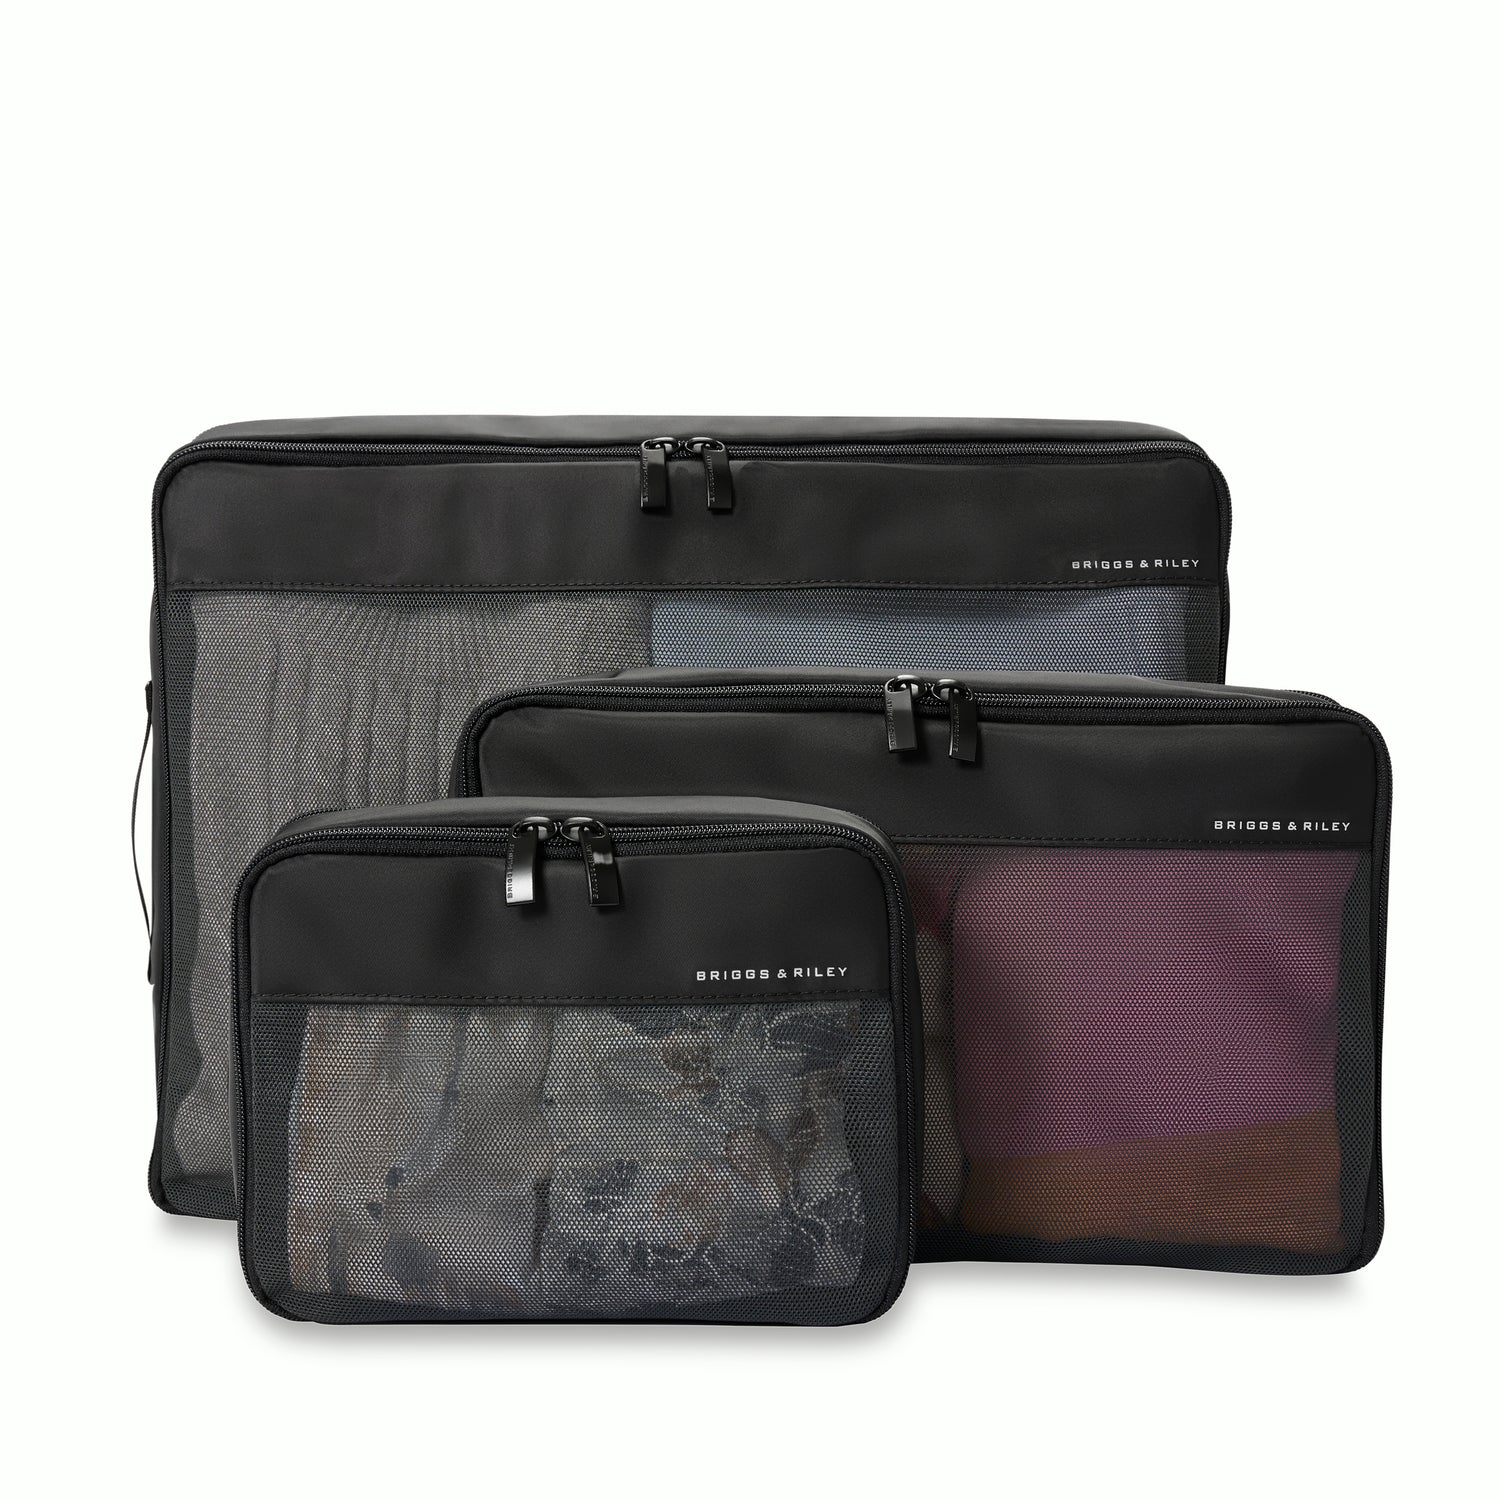 Packing Cubes | Check In Packing Cube Set | Briggs & Riley